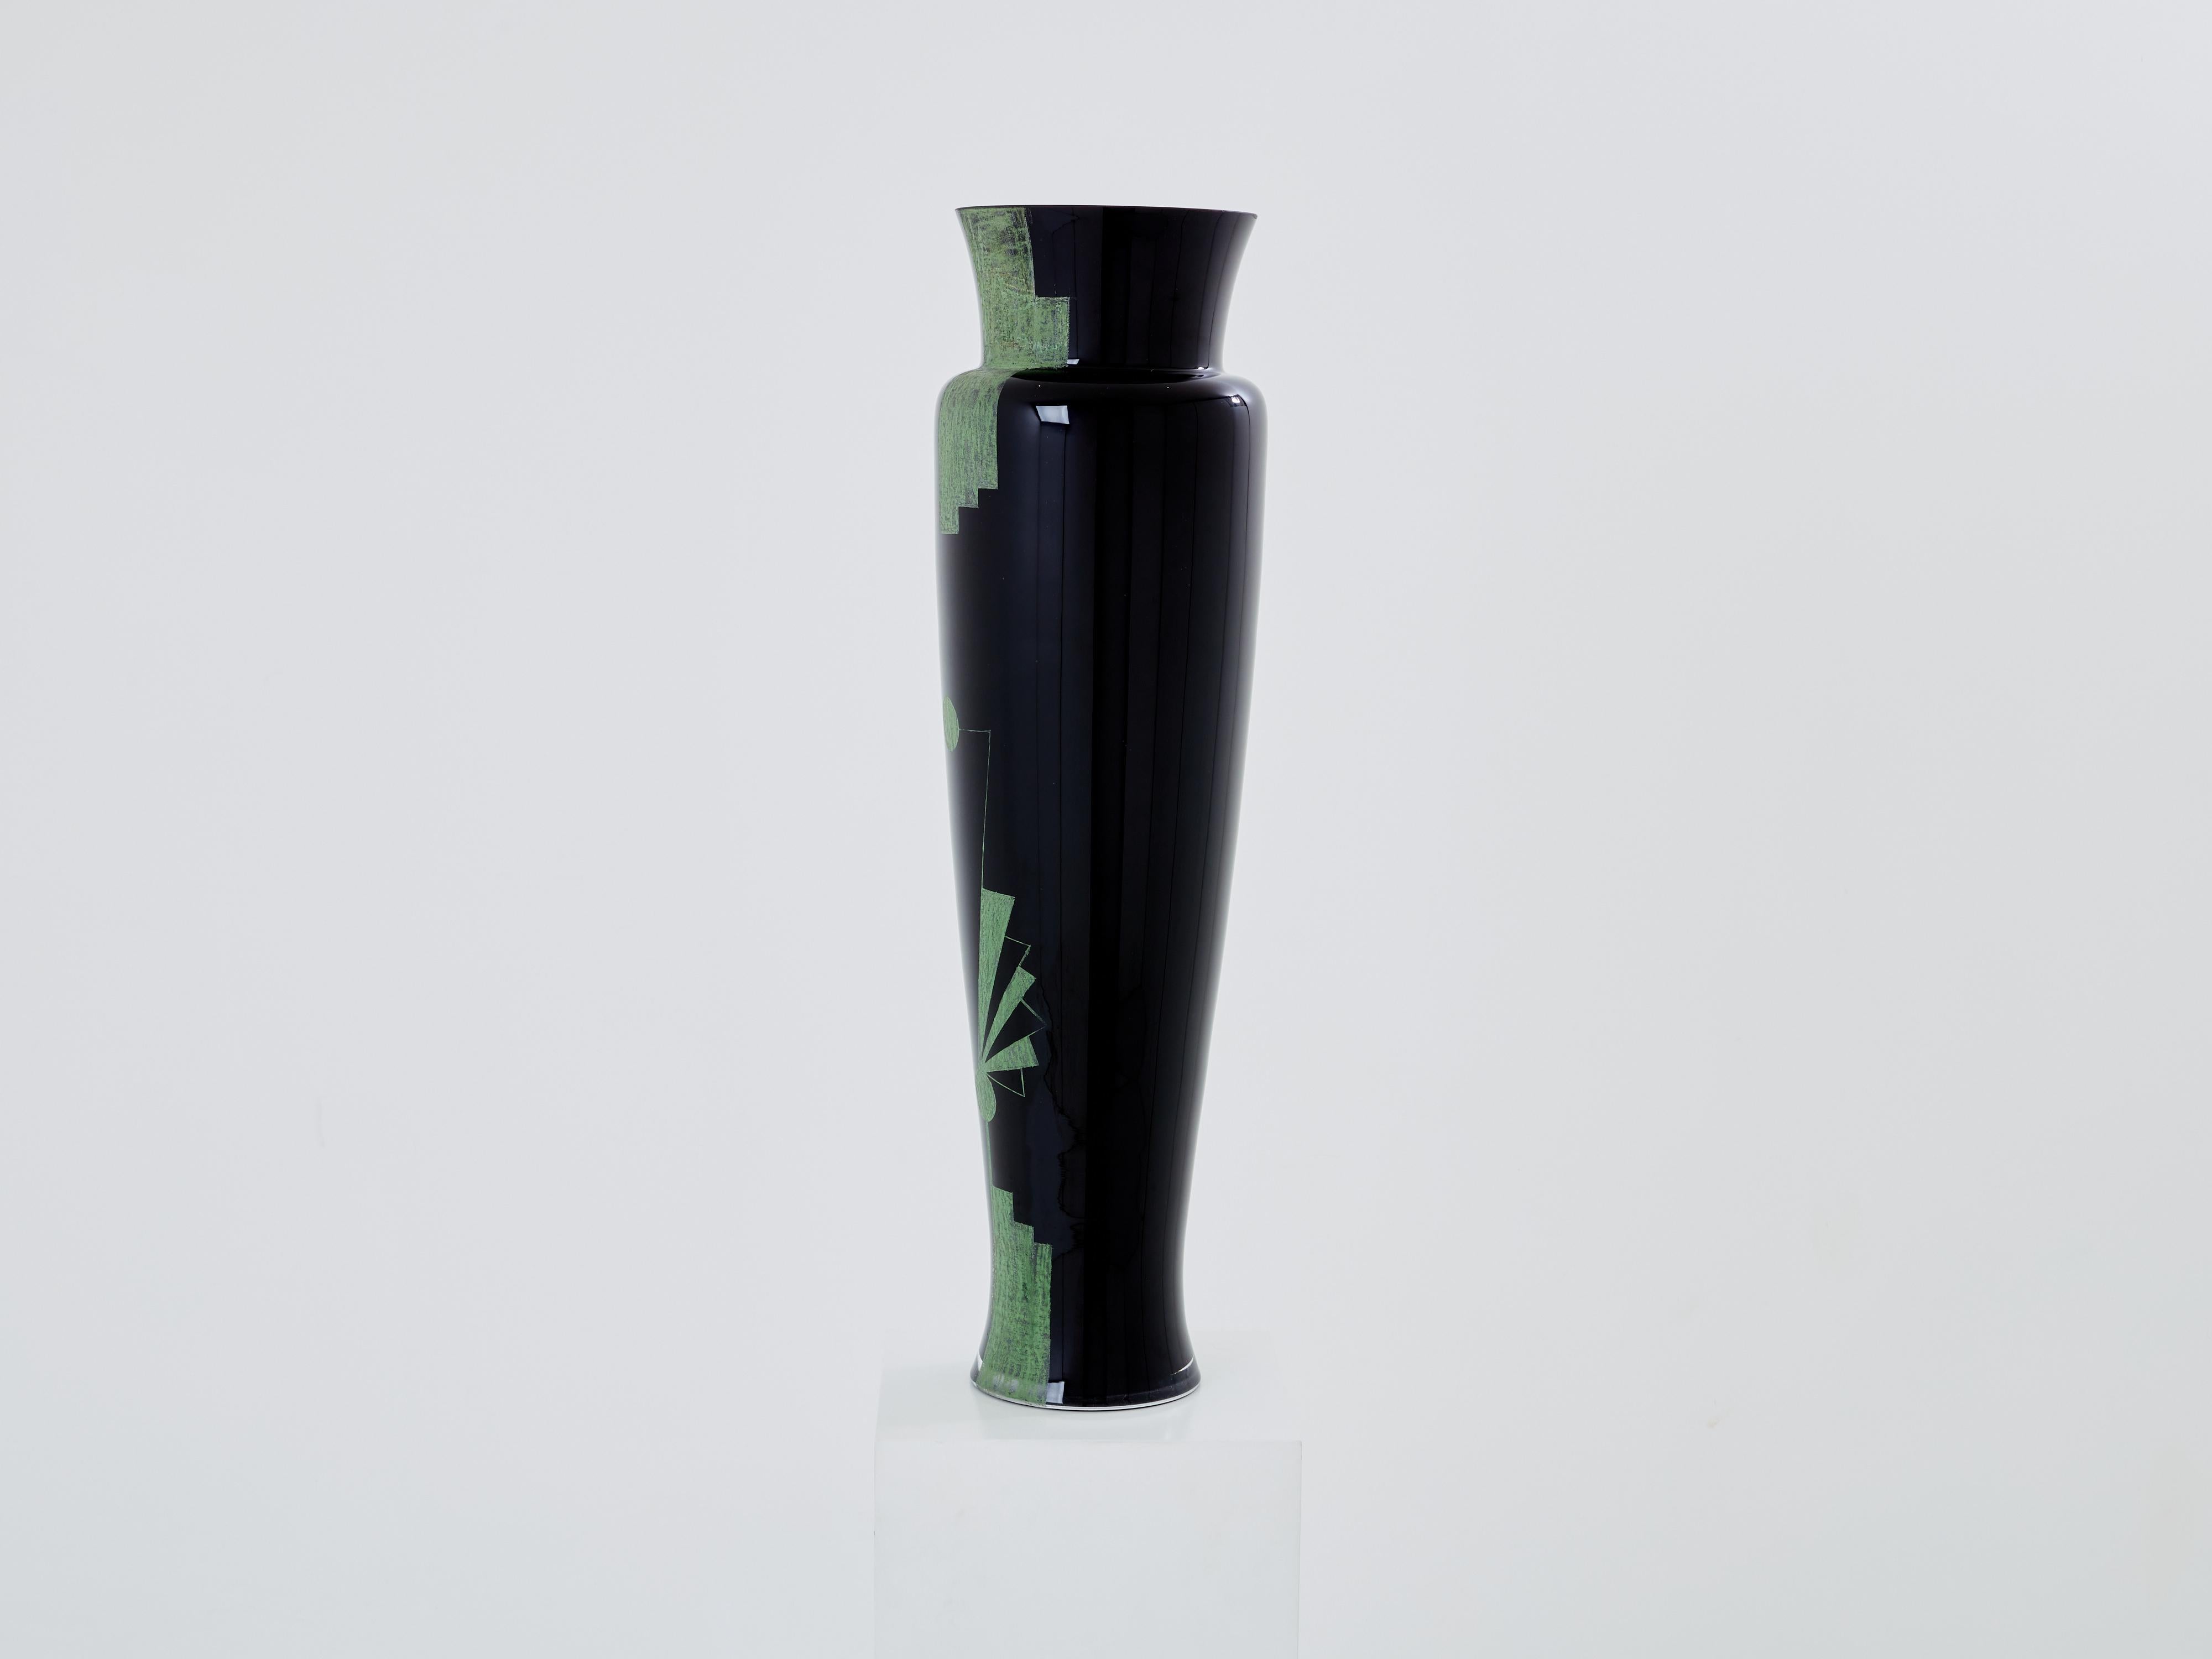 This large Art Deco vase in black opaline glass is signed by the Russian artist Anatole Riecke, and dated 1951. As the Master Glassmaker of La Coupole in Paris, he was responsible for the iconic Art Deco decor of this Parisian hotspot during the